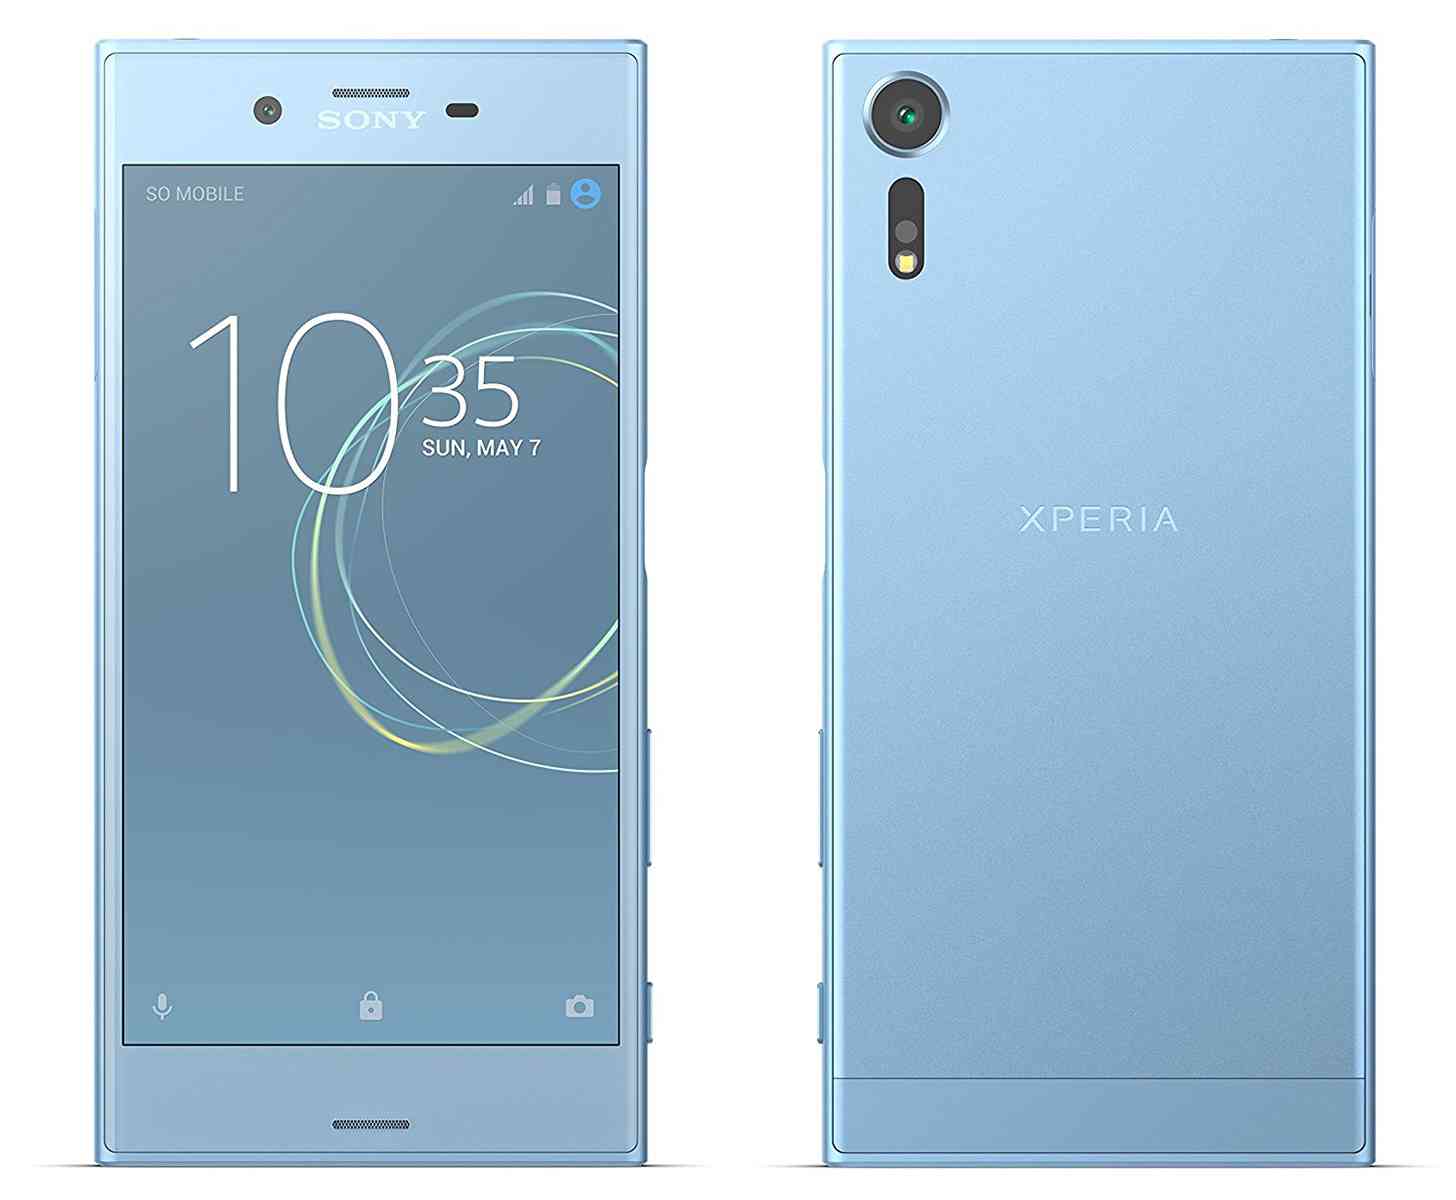 Sony Xperia XZs Ice Blue official